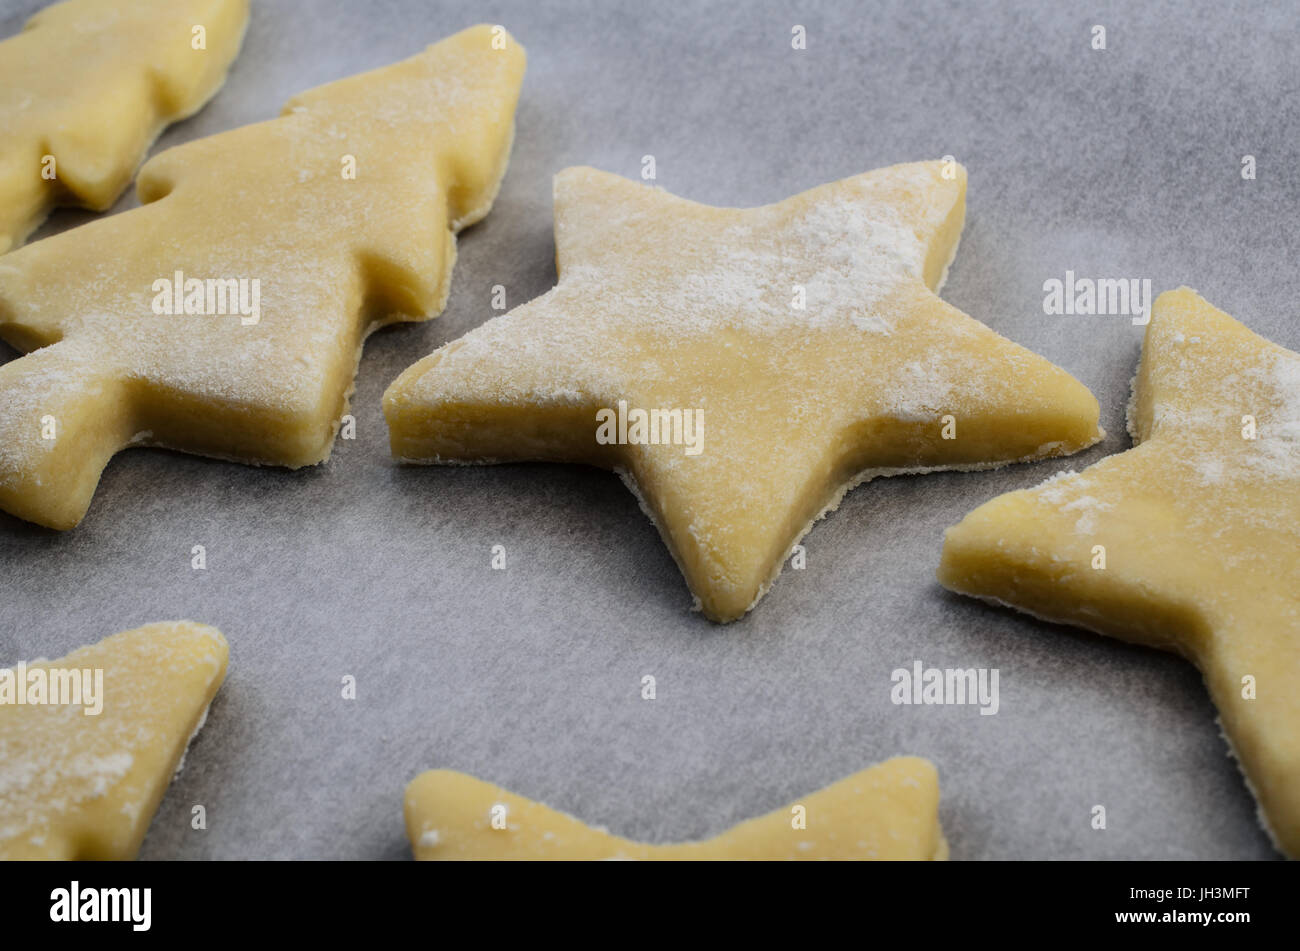 Christmas biscuits or cookie shapes, cut from raw pastry dough on baking parchment paper, ready to go into oven. Stock Photo